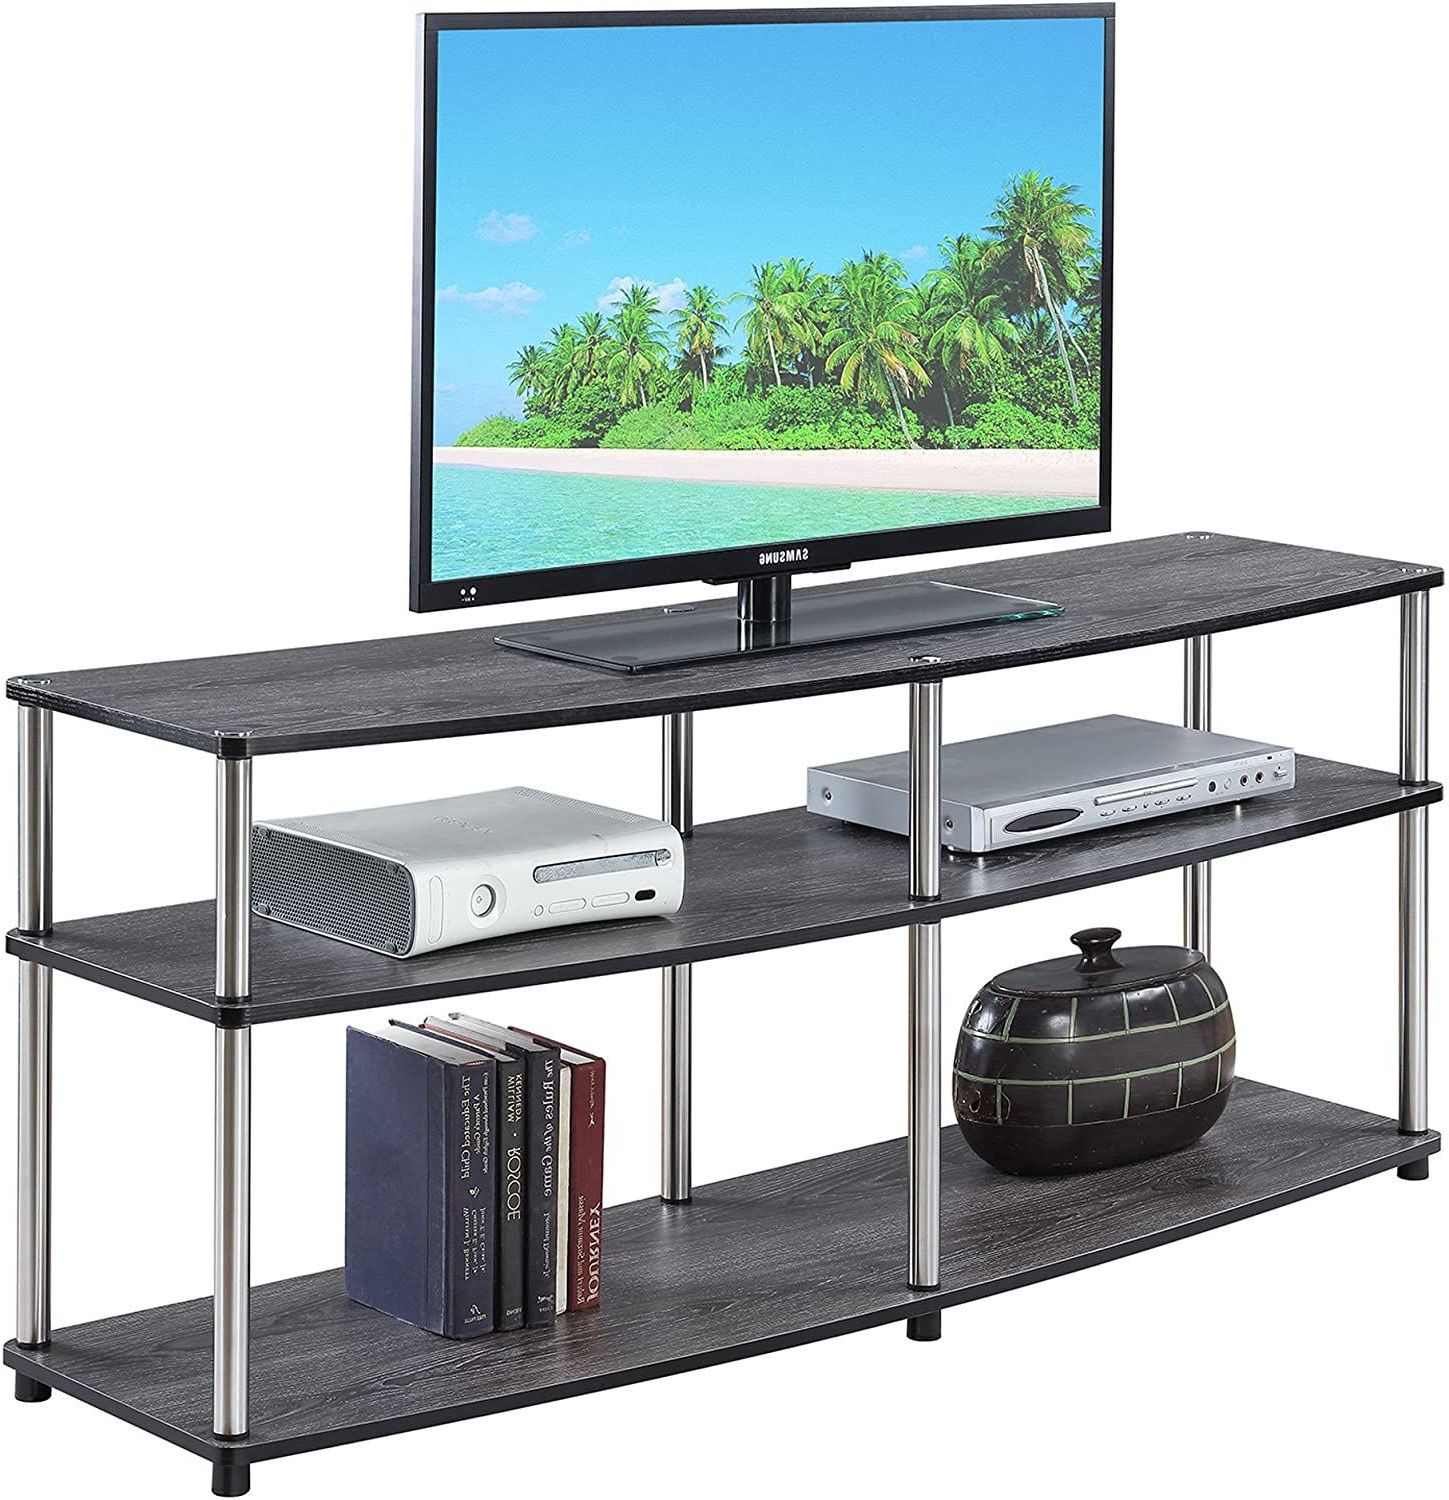 Convenience Concepts Designs2go 3 Tier 60" Tv Stand Throughout Winsome Wood Zena Corner Tv &amp; Media Stands In Espresso Finish (Gallery 9 of 20)